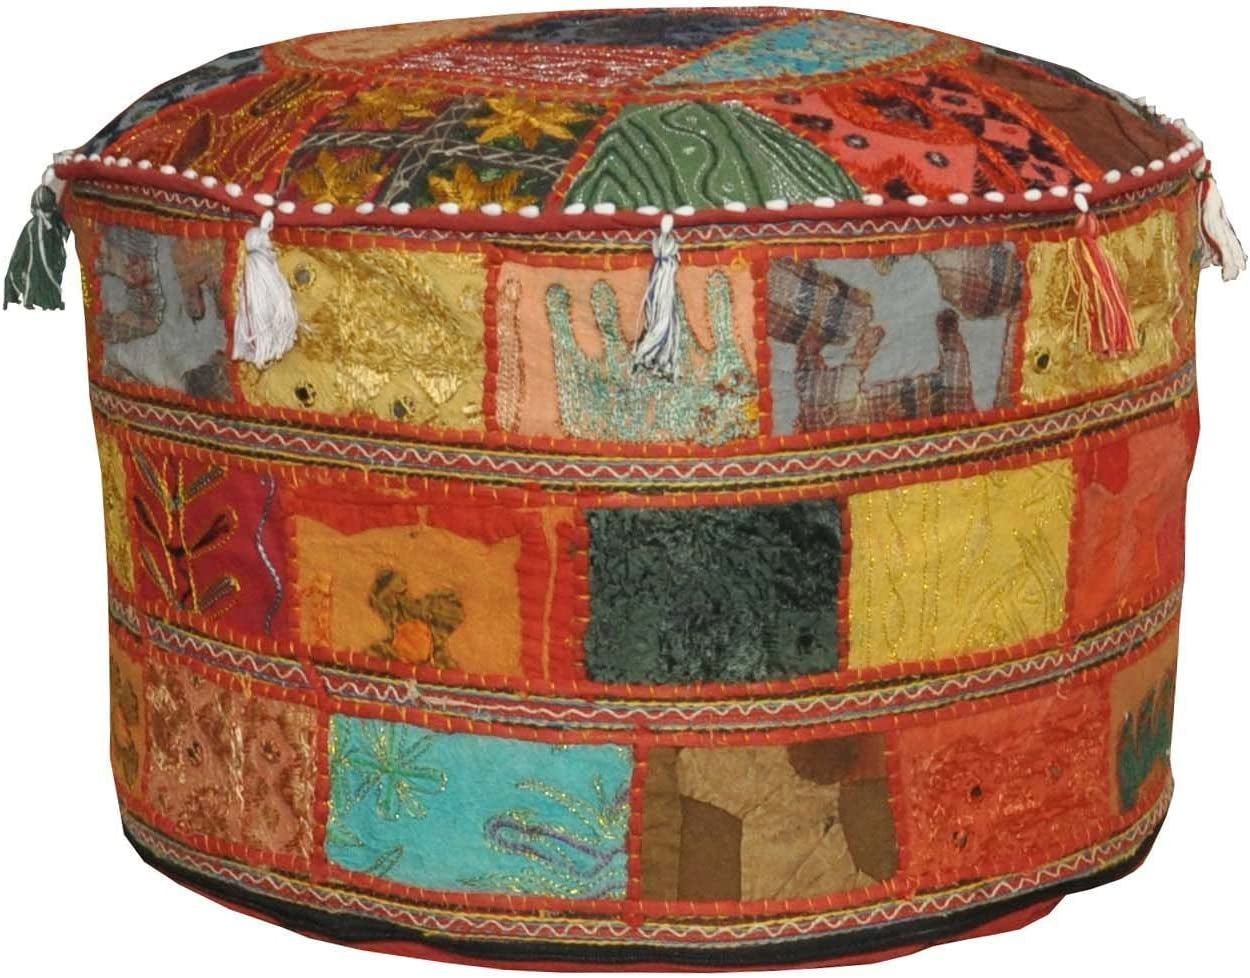 India Floor Cotton Ottoman Embellished with Patchwork and Embroidery Work Cushion Cover